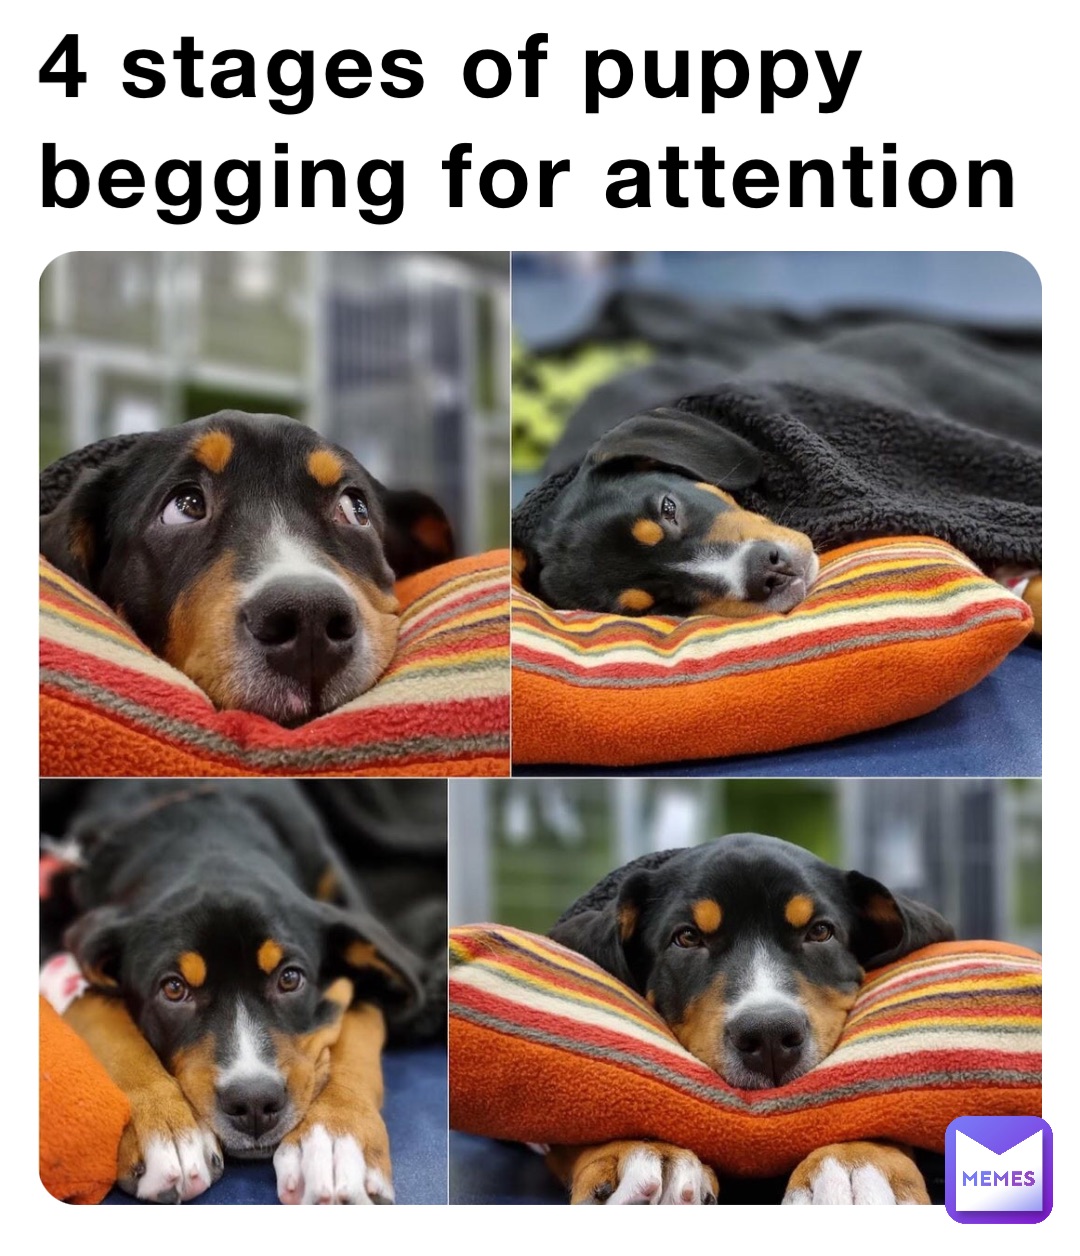 4 stages of puppy begging for attention